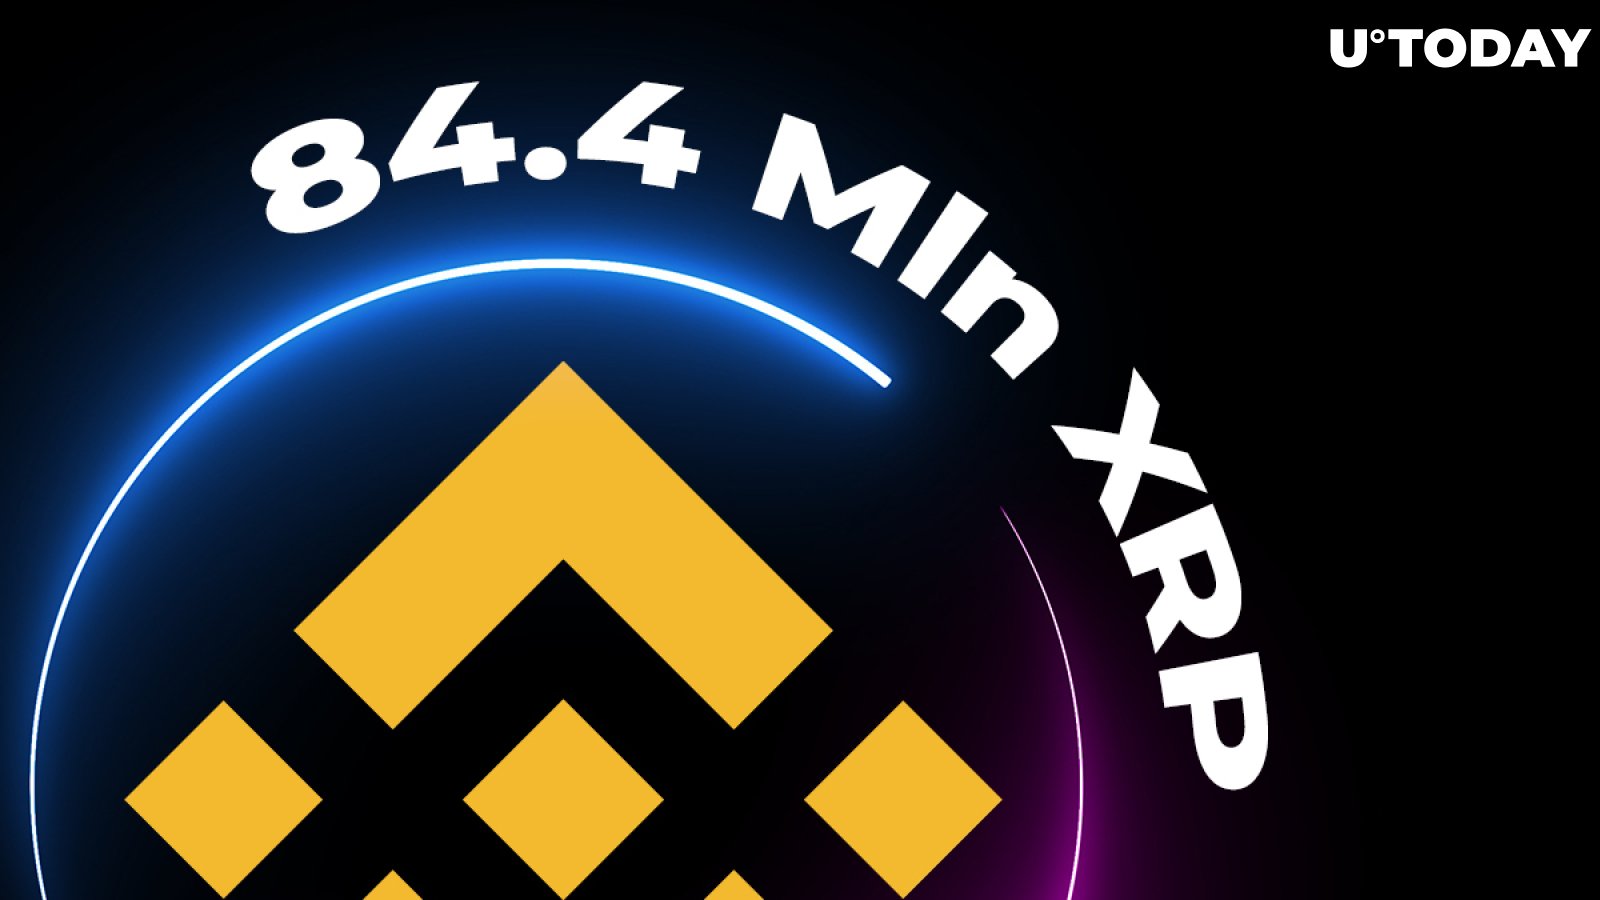 84.4 Mln XRP Hula Hoops Around Binance, While XRP Liquidity Indexes Fail to Reach New ATHs